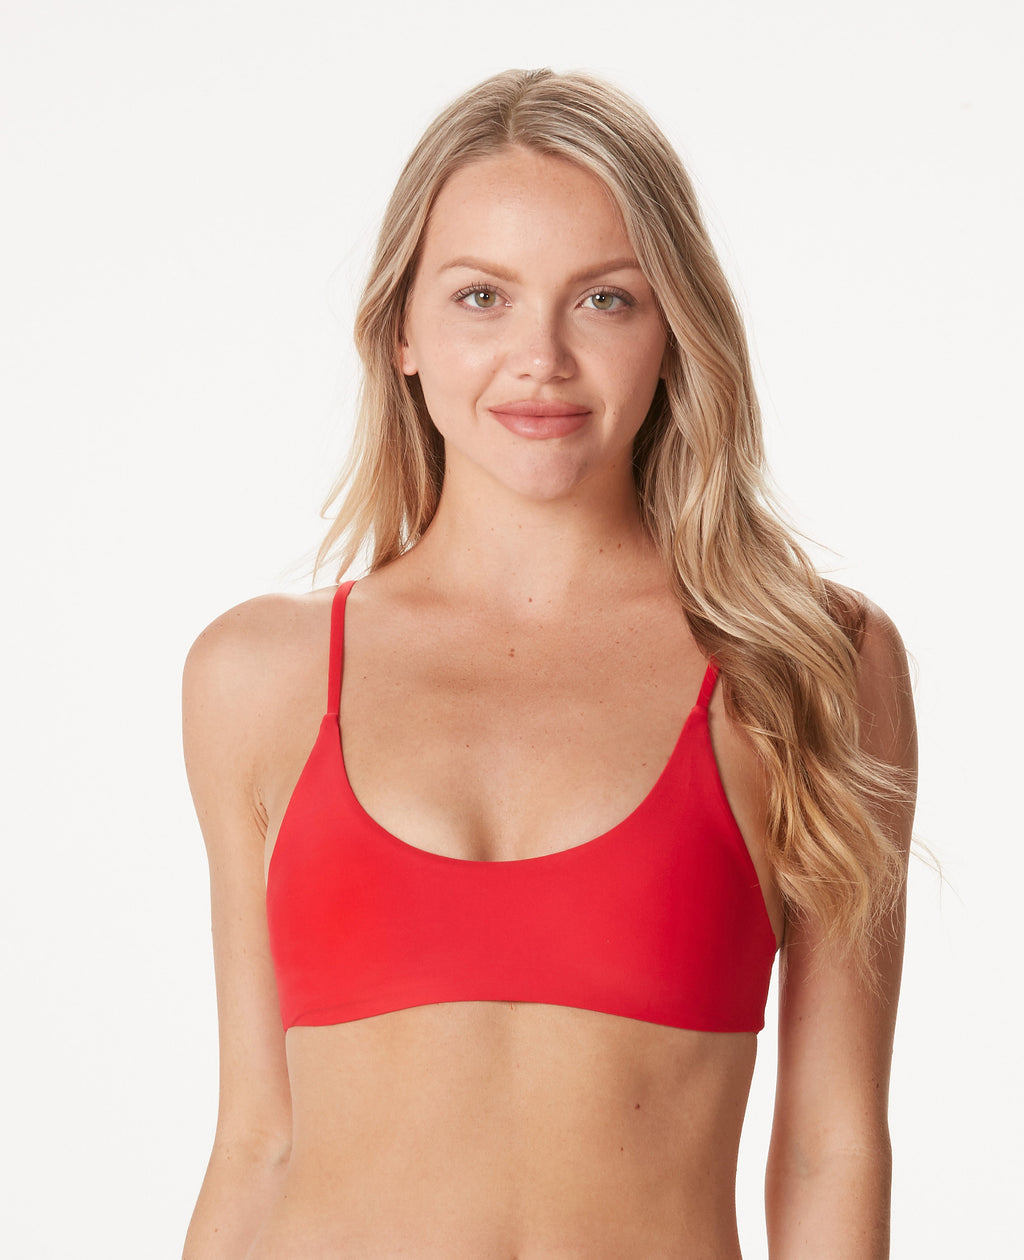 Woman in bright red bikini top against white background.